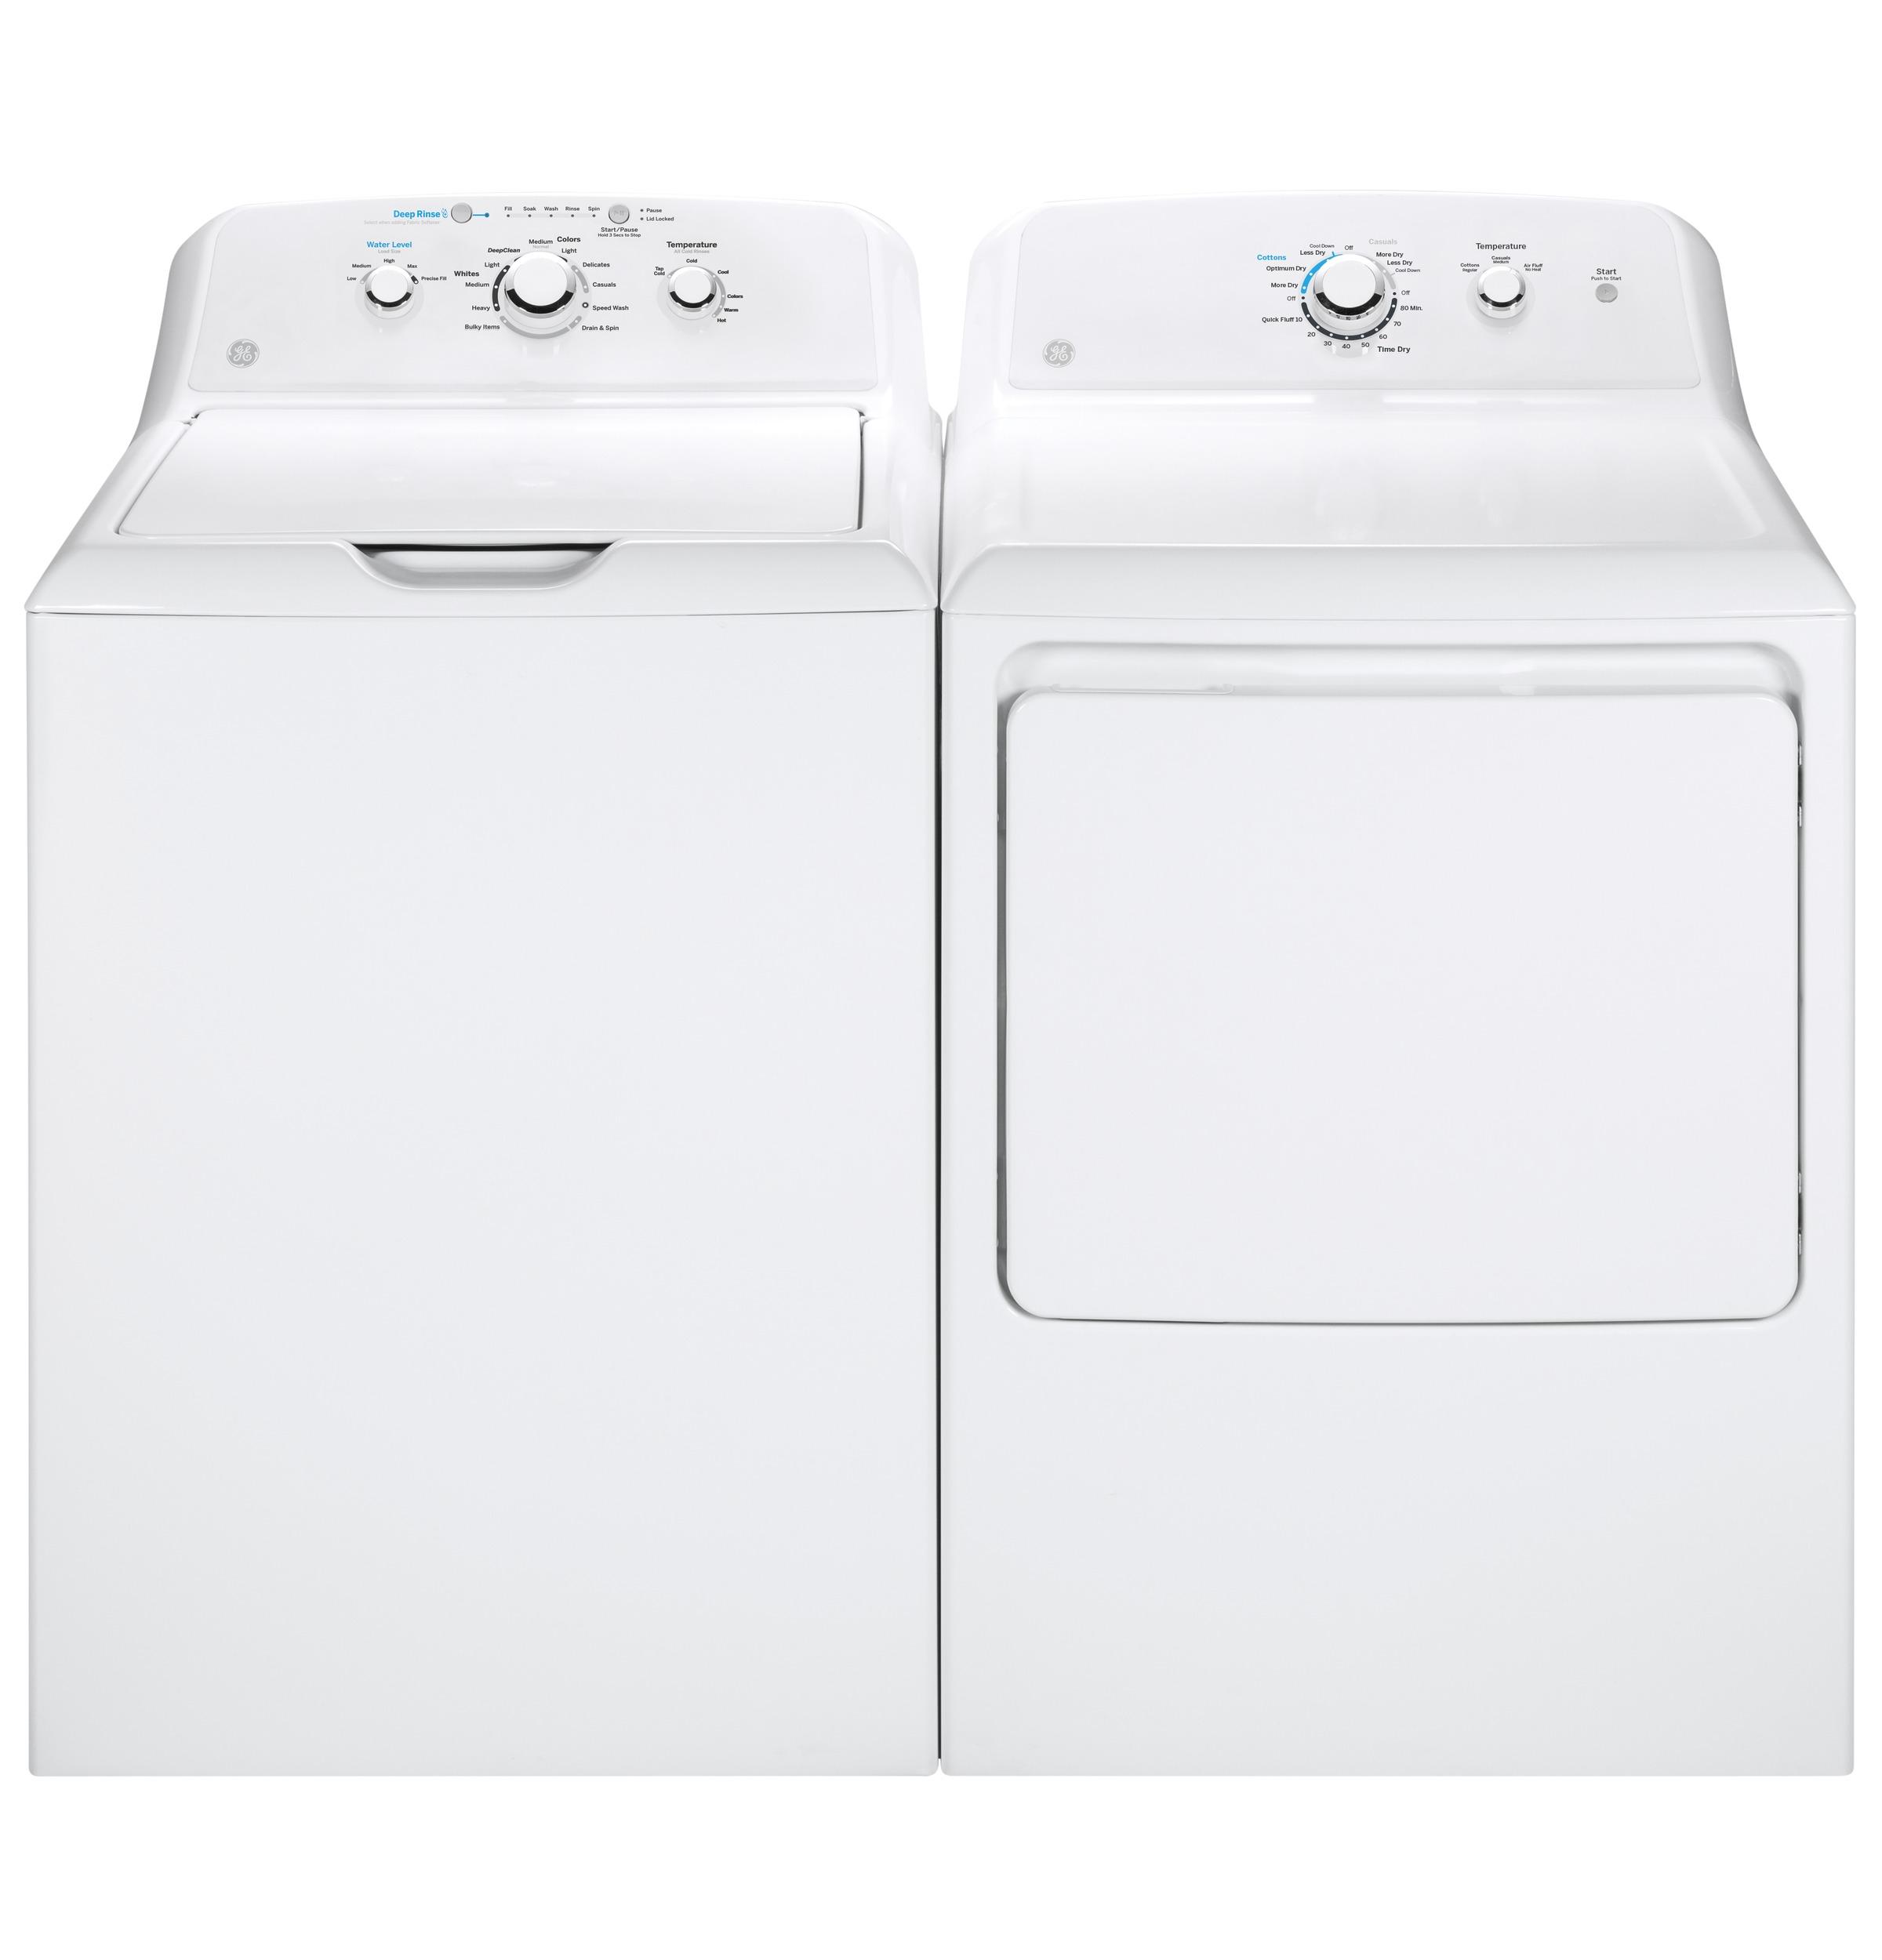 GE® Appliances 4.2 cu. ft. Capacity Washer Top Load with Stainless Steel Basket model GTW335ASNWW - image 3 of 5